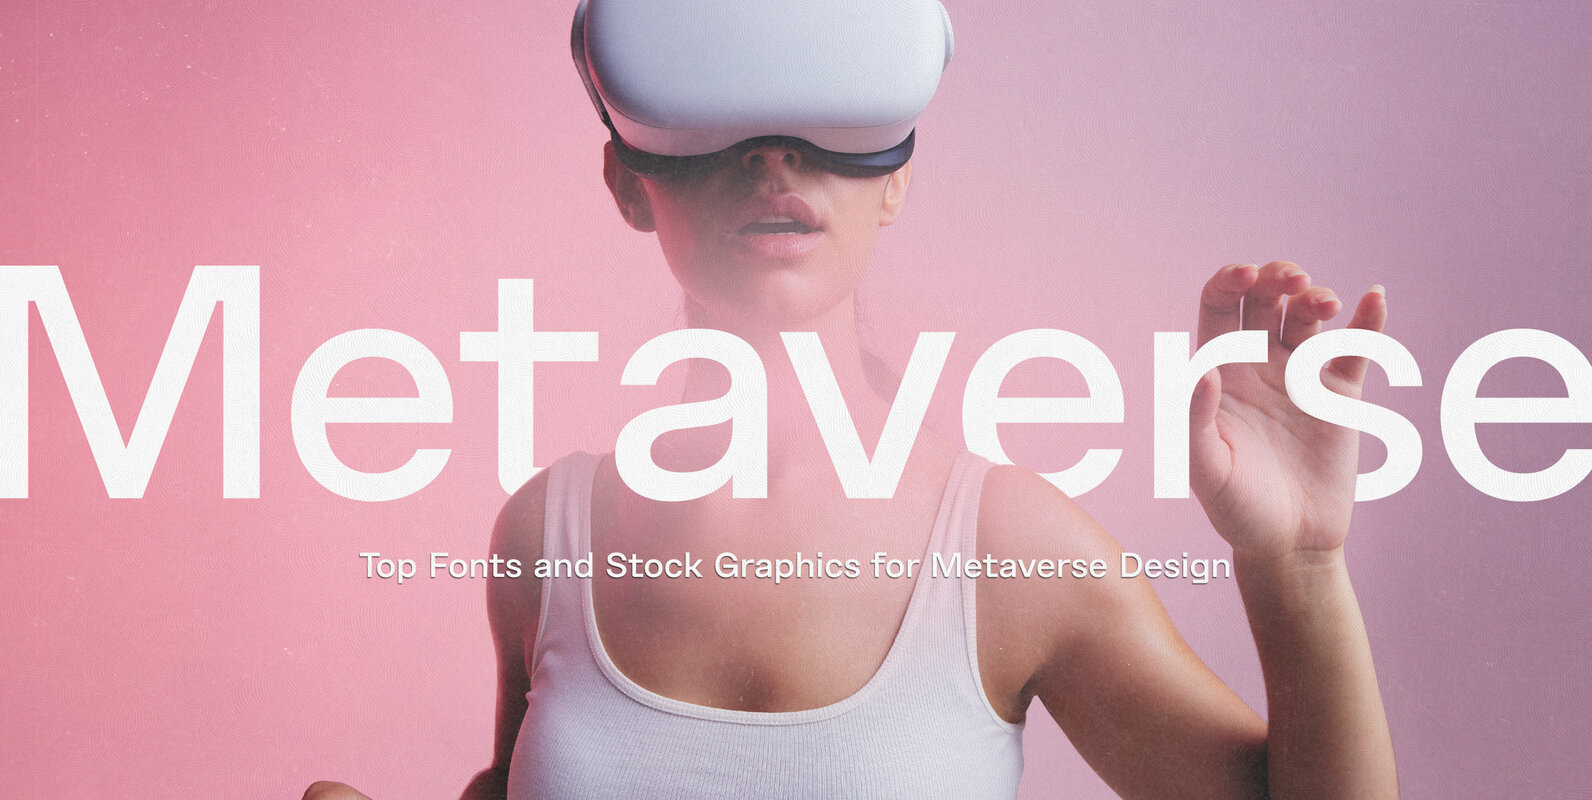 Top Fonts and Graphics for Metaverse Design